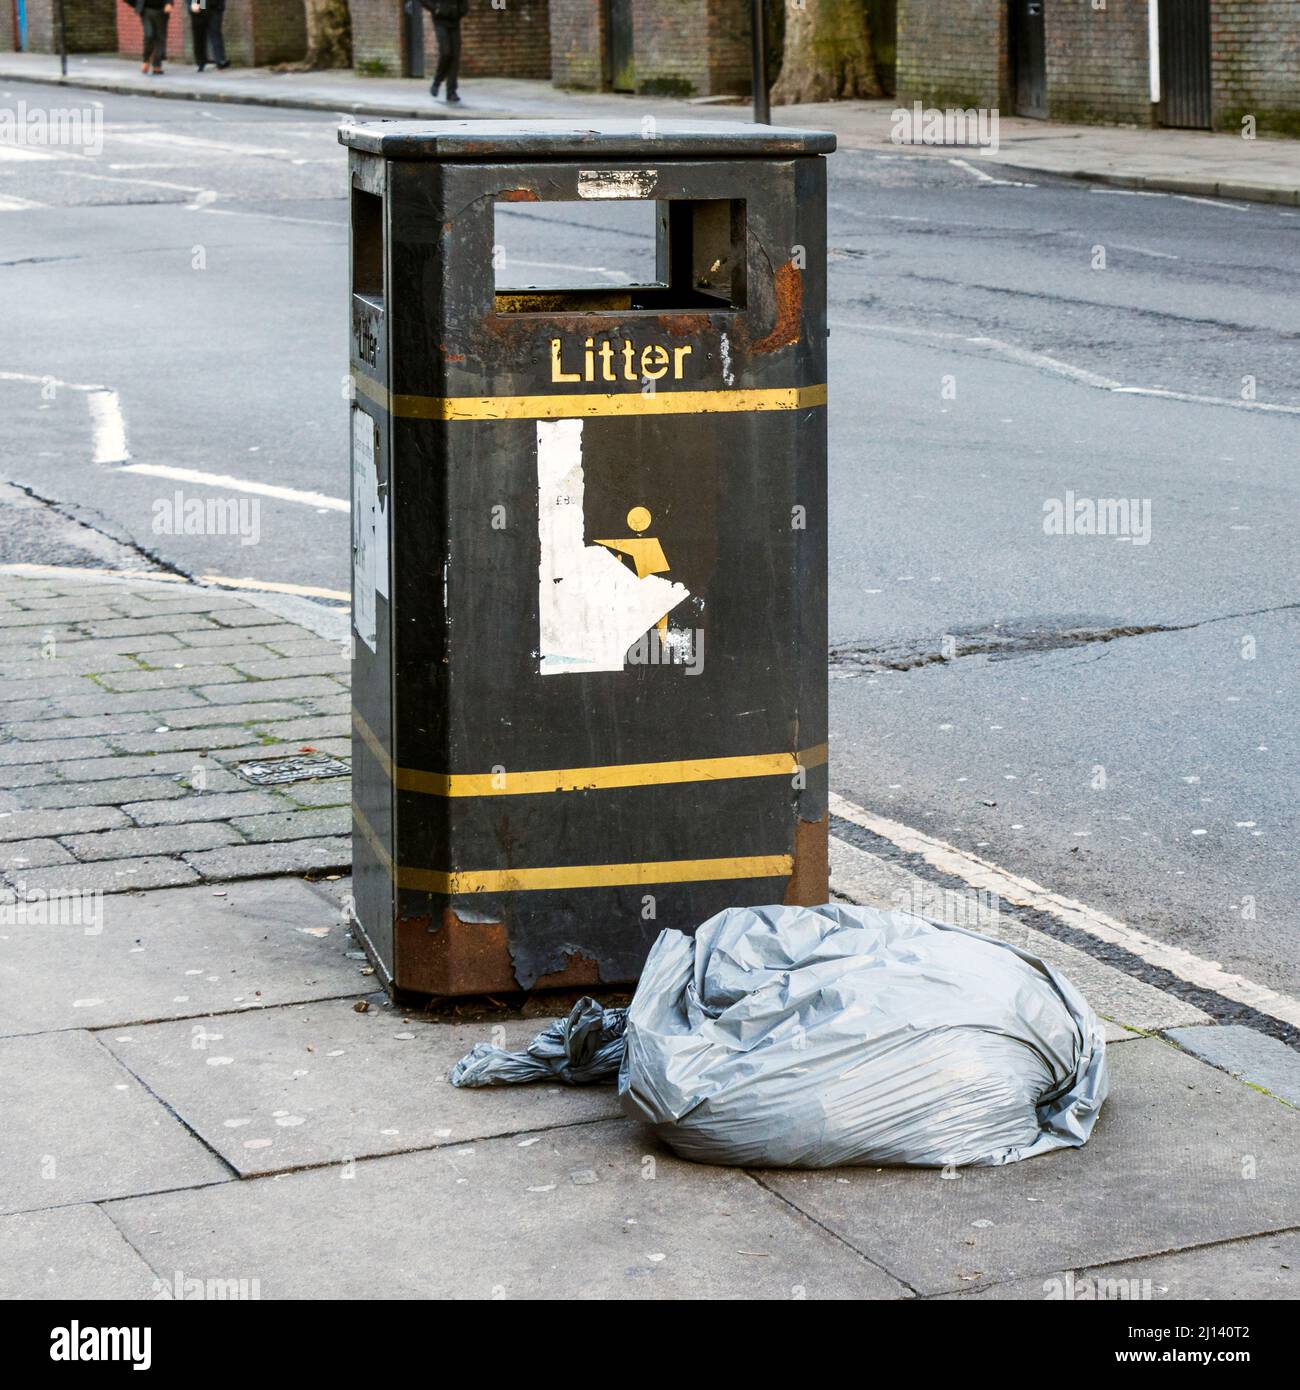 A bag of rubbish left next to a litter bin, London, UK Stock Photo